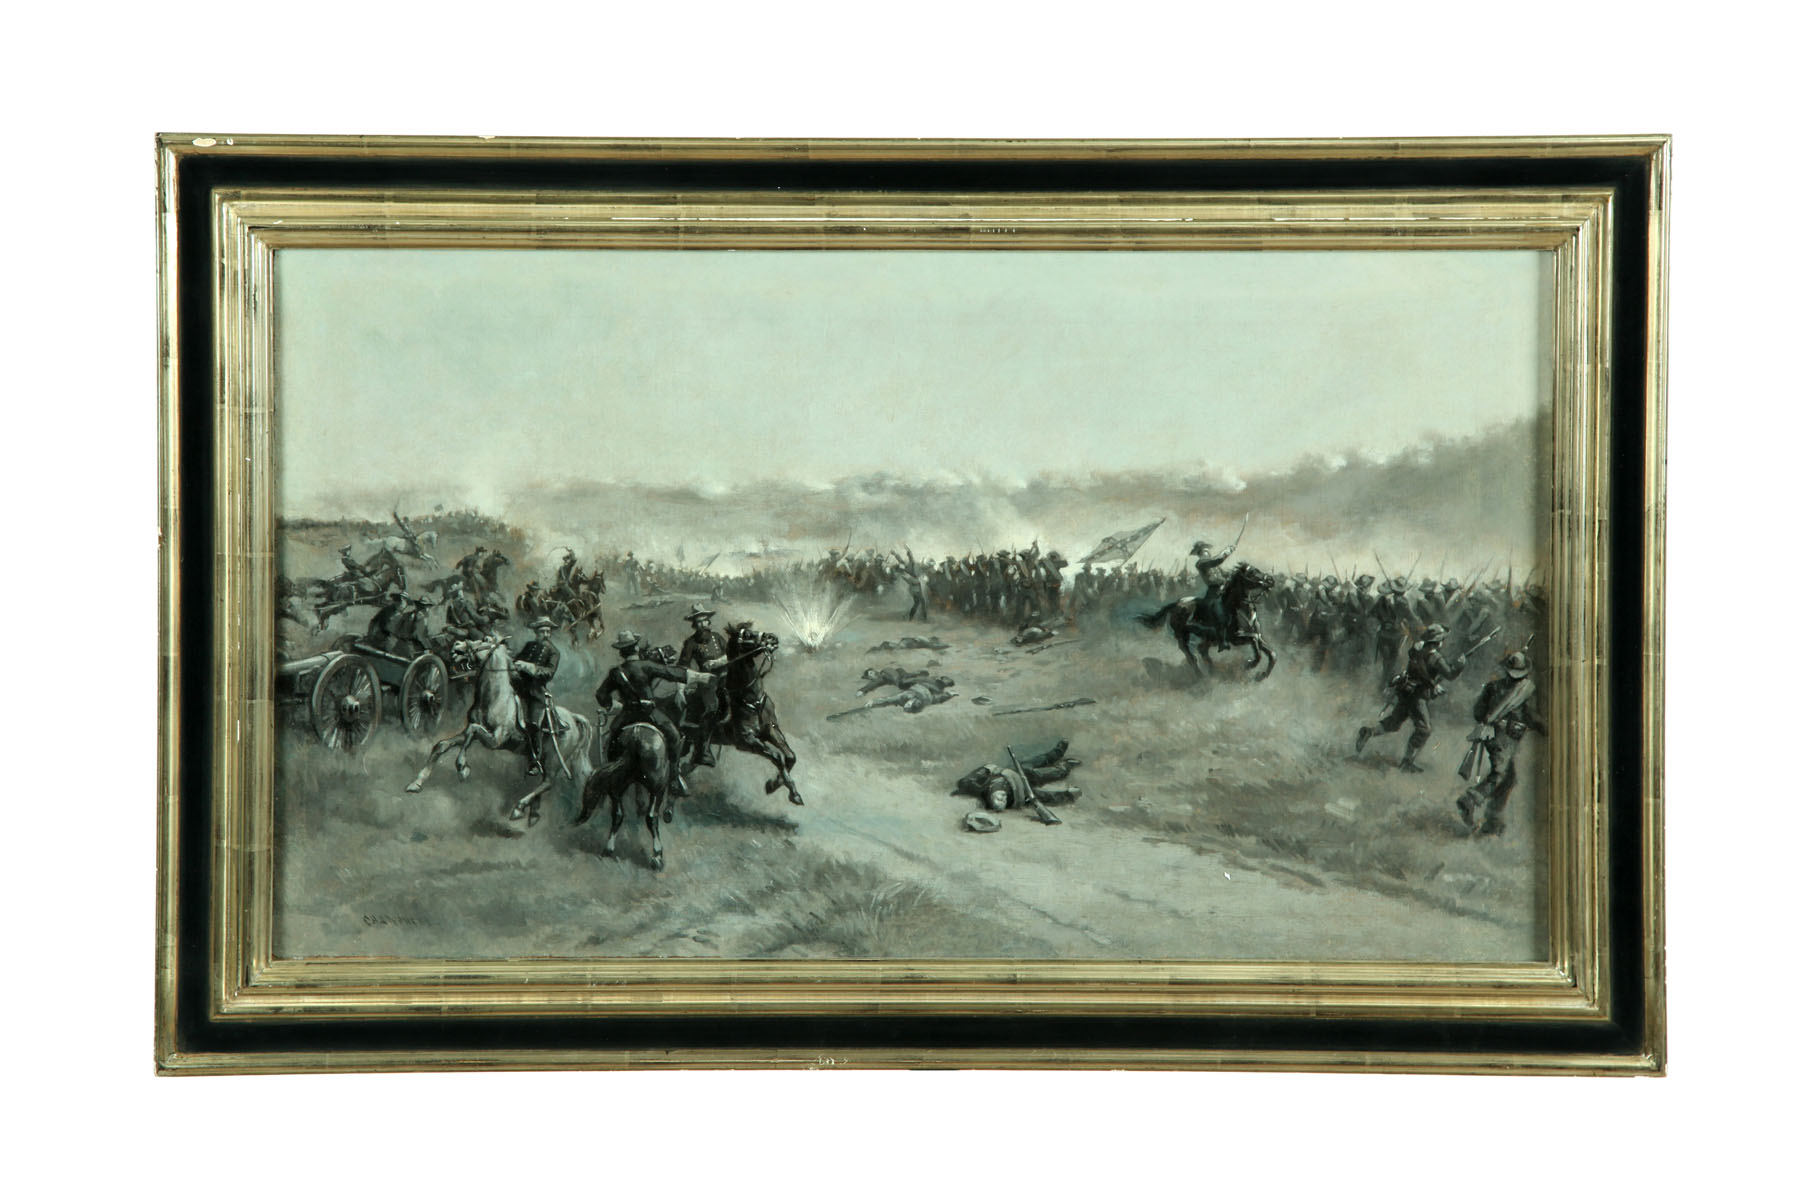 PICKETT'S CHARGE BY CHARLES HALLOWELL